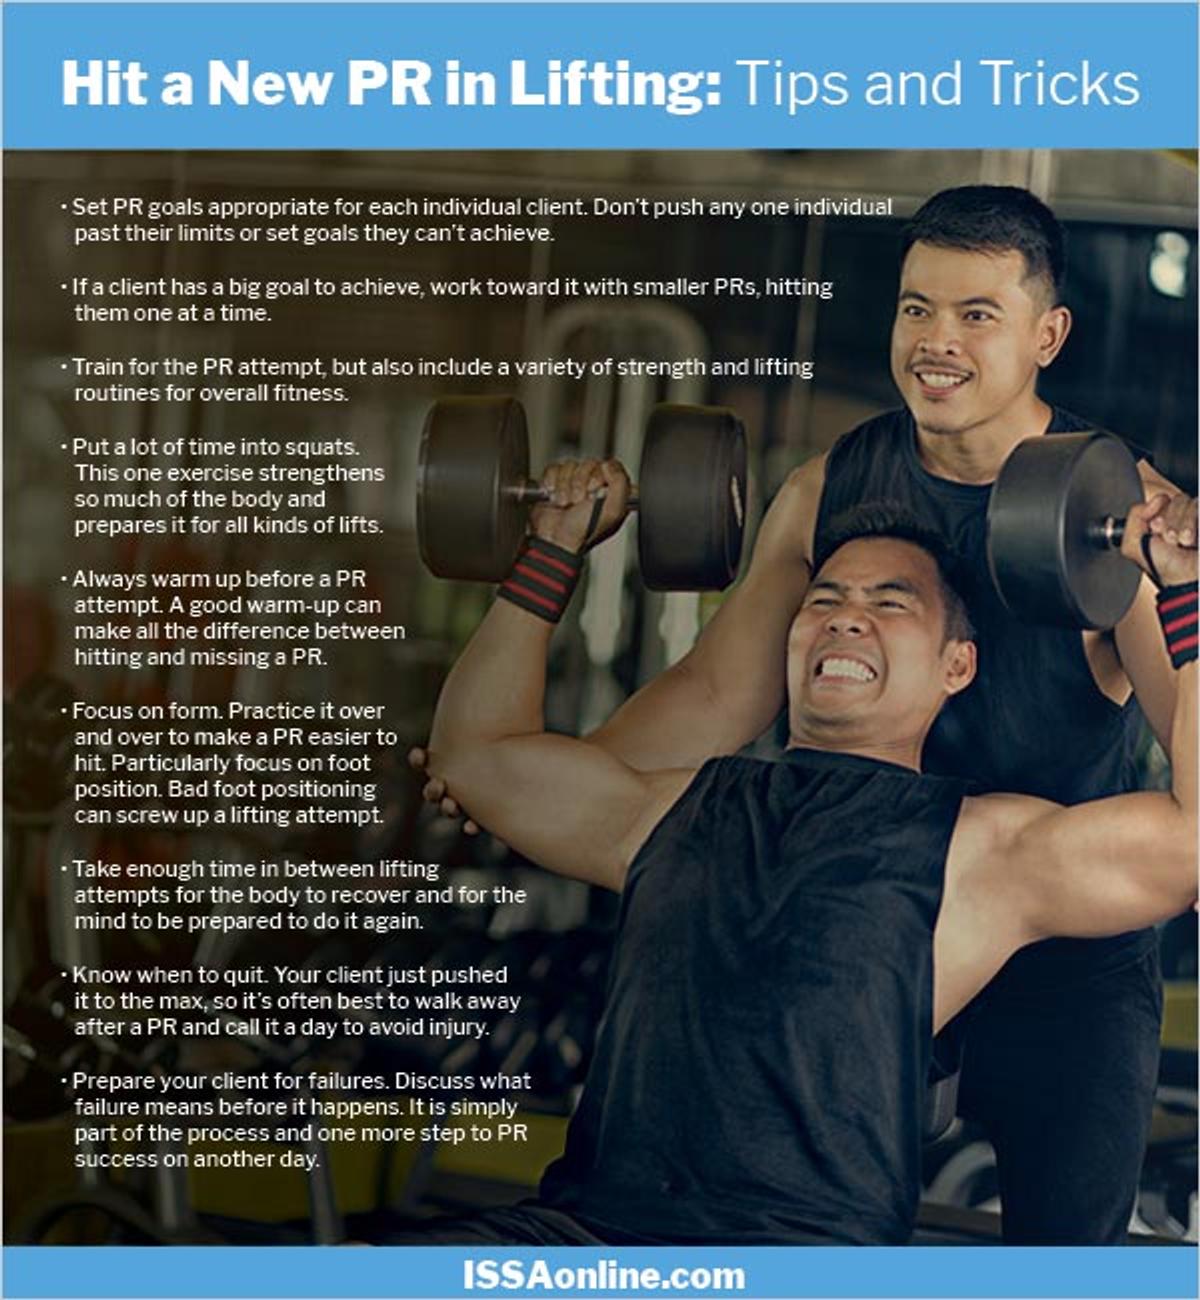 How to Help Your Client Hit a New PR